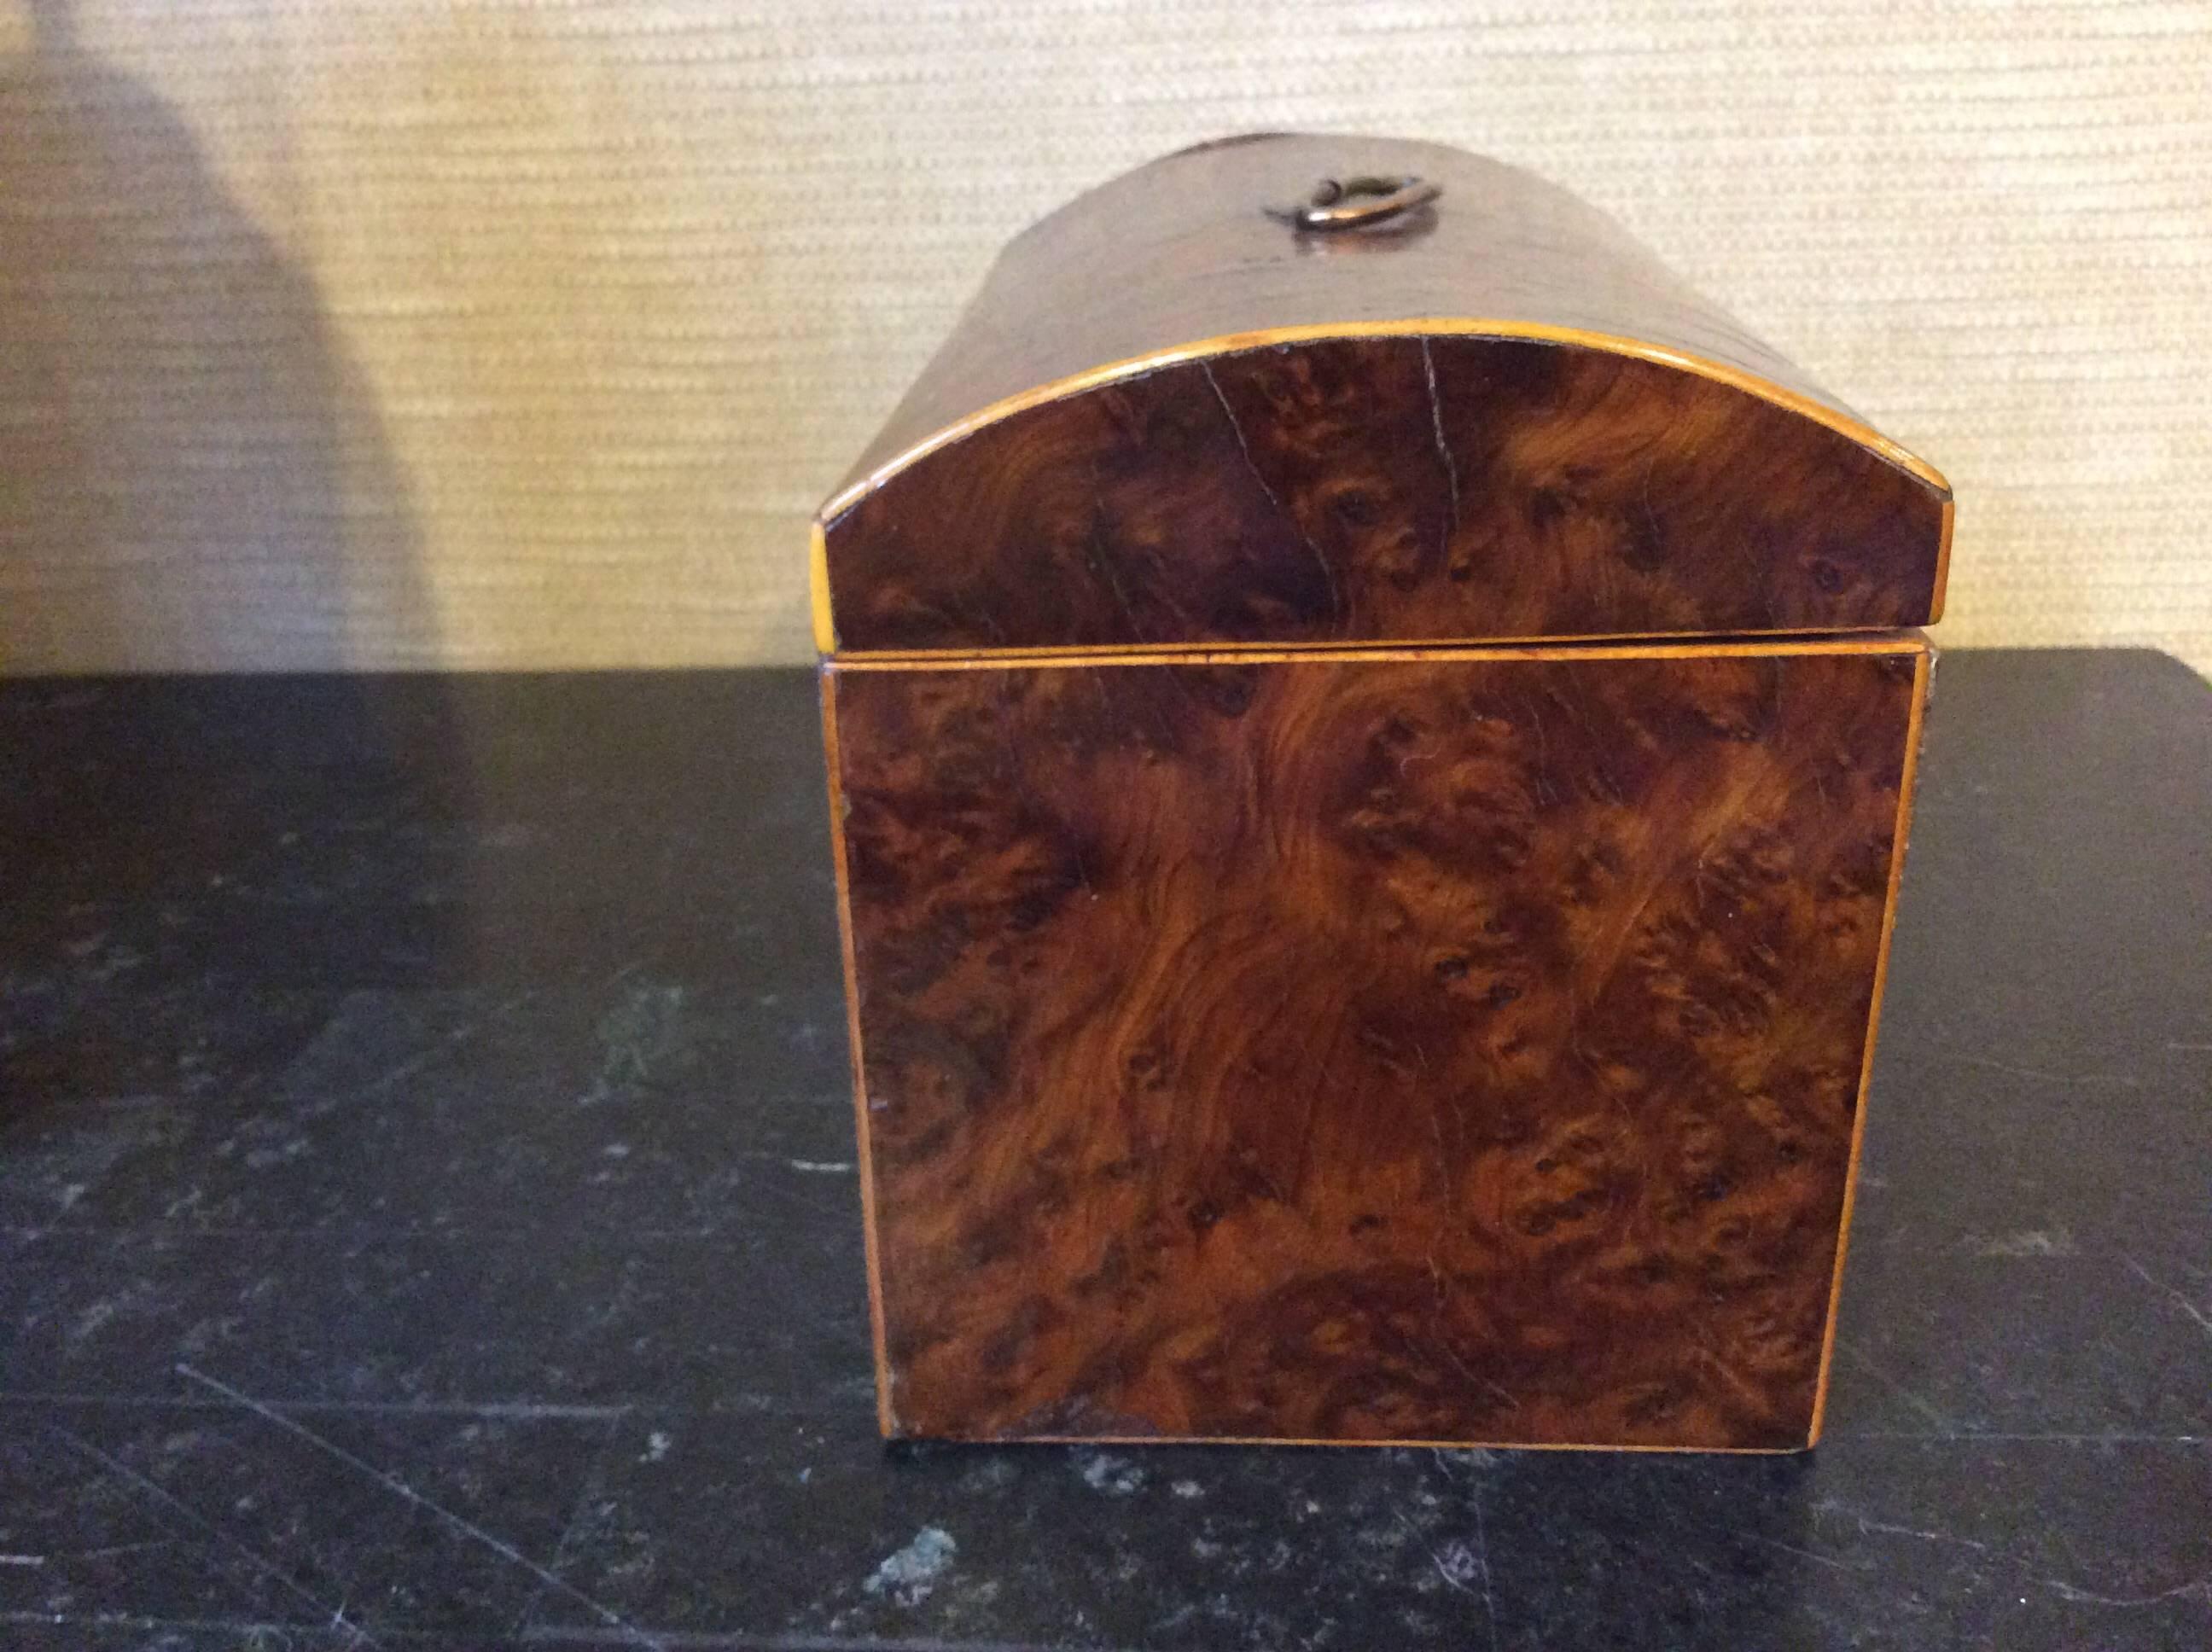 English Burl Yew Wood Tea Caddy with Dome Top In Excellent Condition For Sale In Highland Park, IL